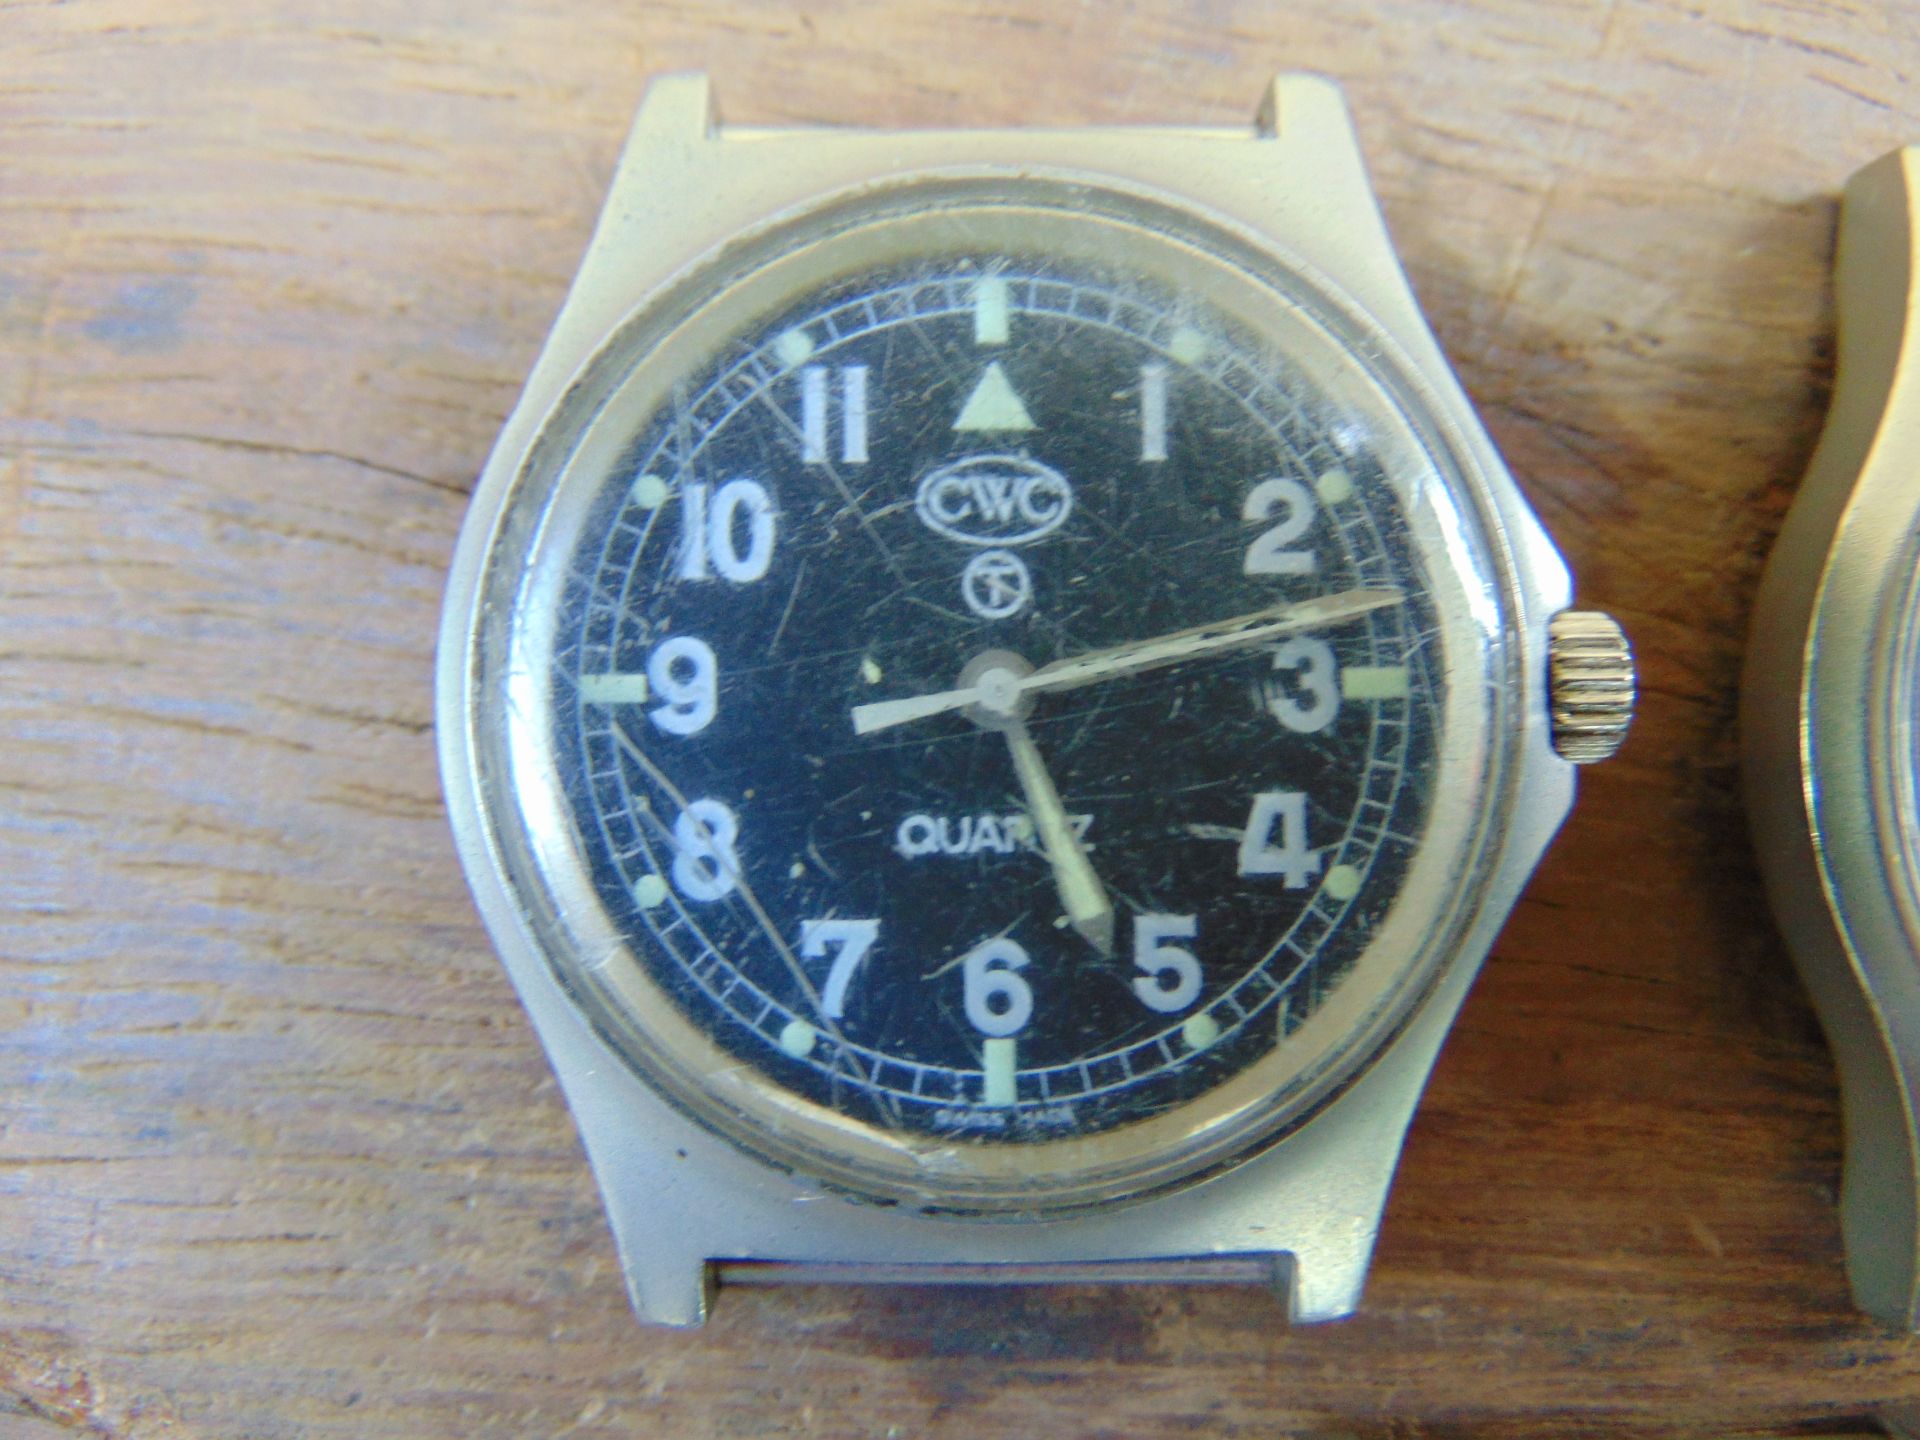 5 x Genuine British Army CWC quartz wrist watches which are suitable for spares or repairs - Image 5 of 6